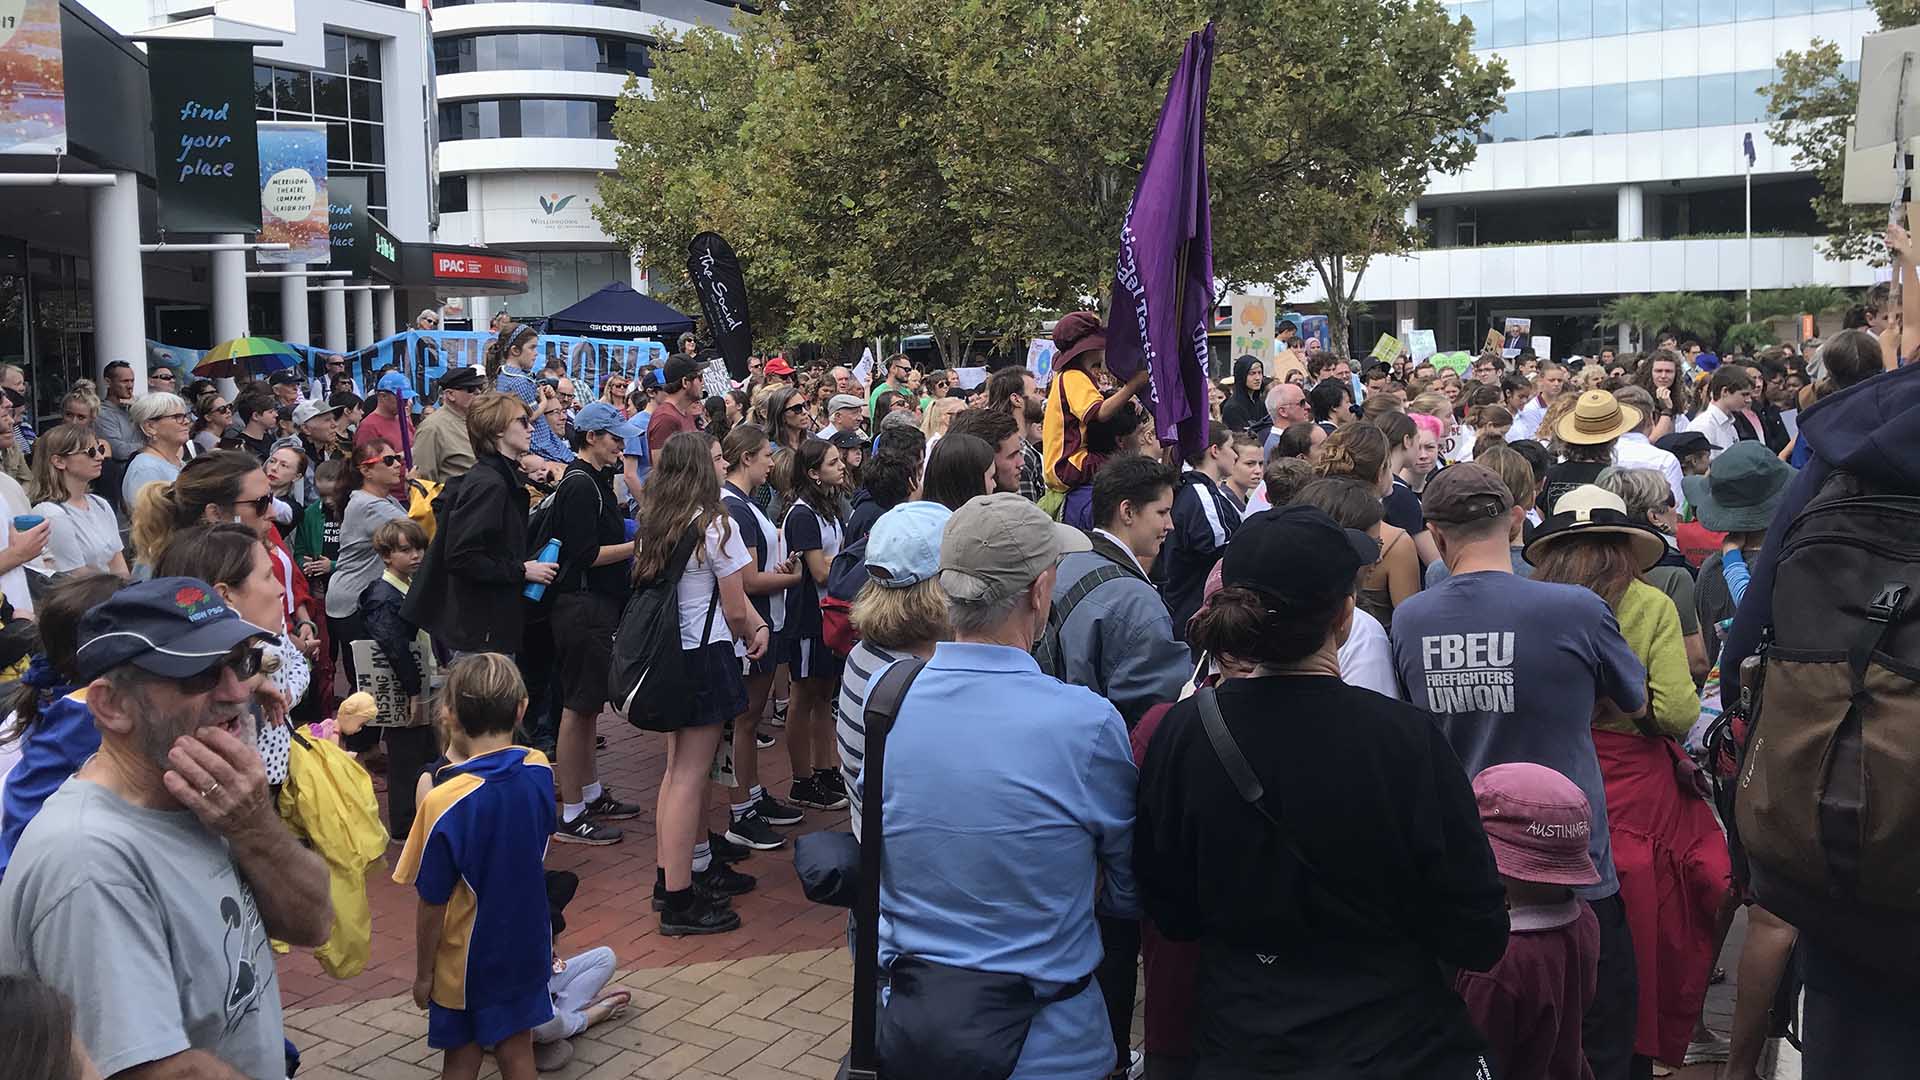 Scenes from a climate change protest in Wollongong